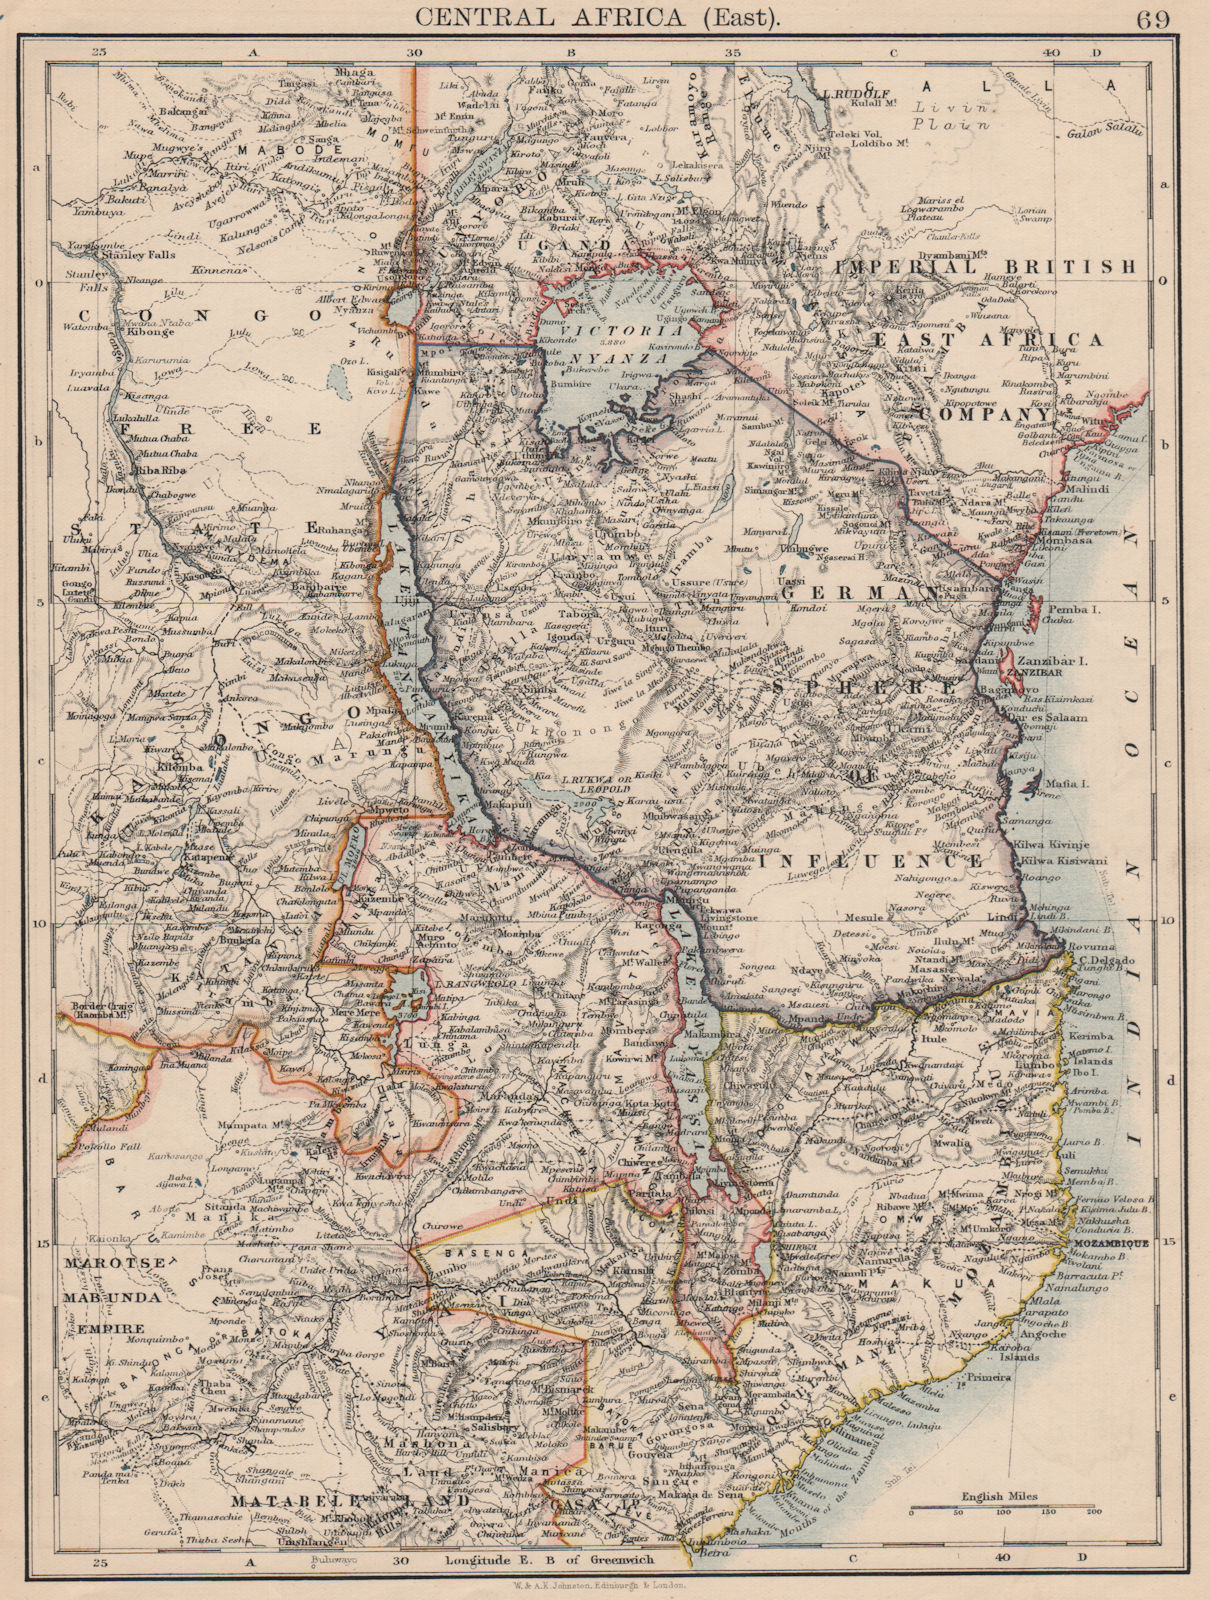 COLONIAL EAST AFRICA. German/British/Portuguese East Africa. Tanzania 1895 map